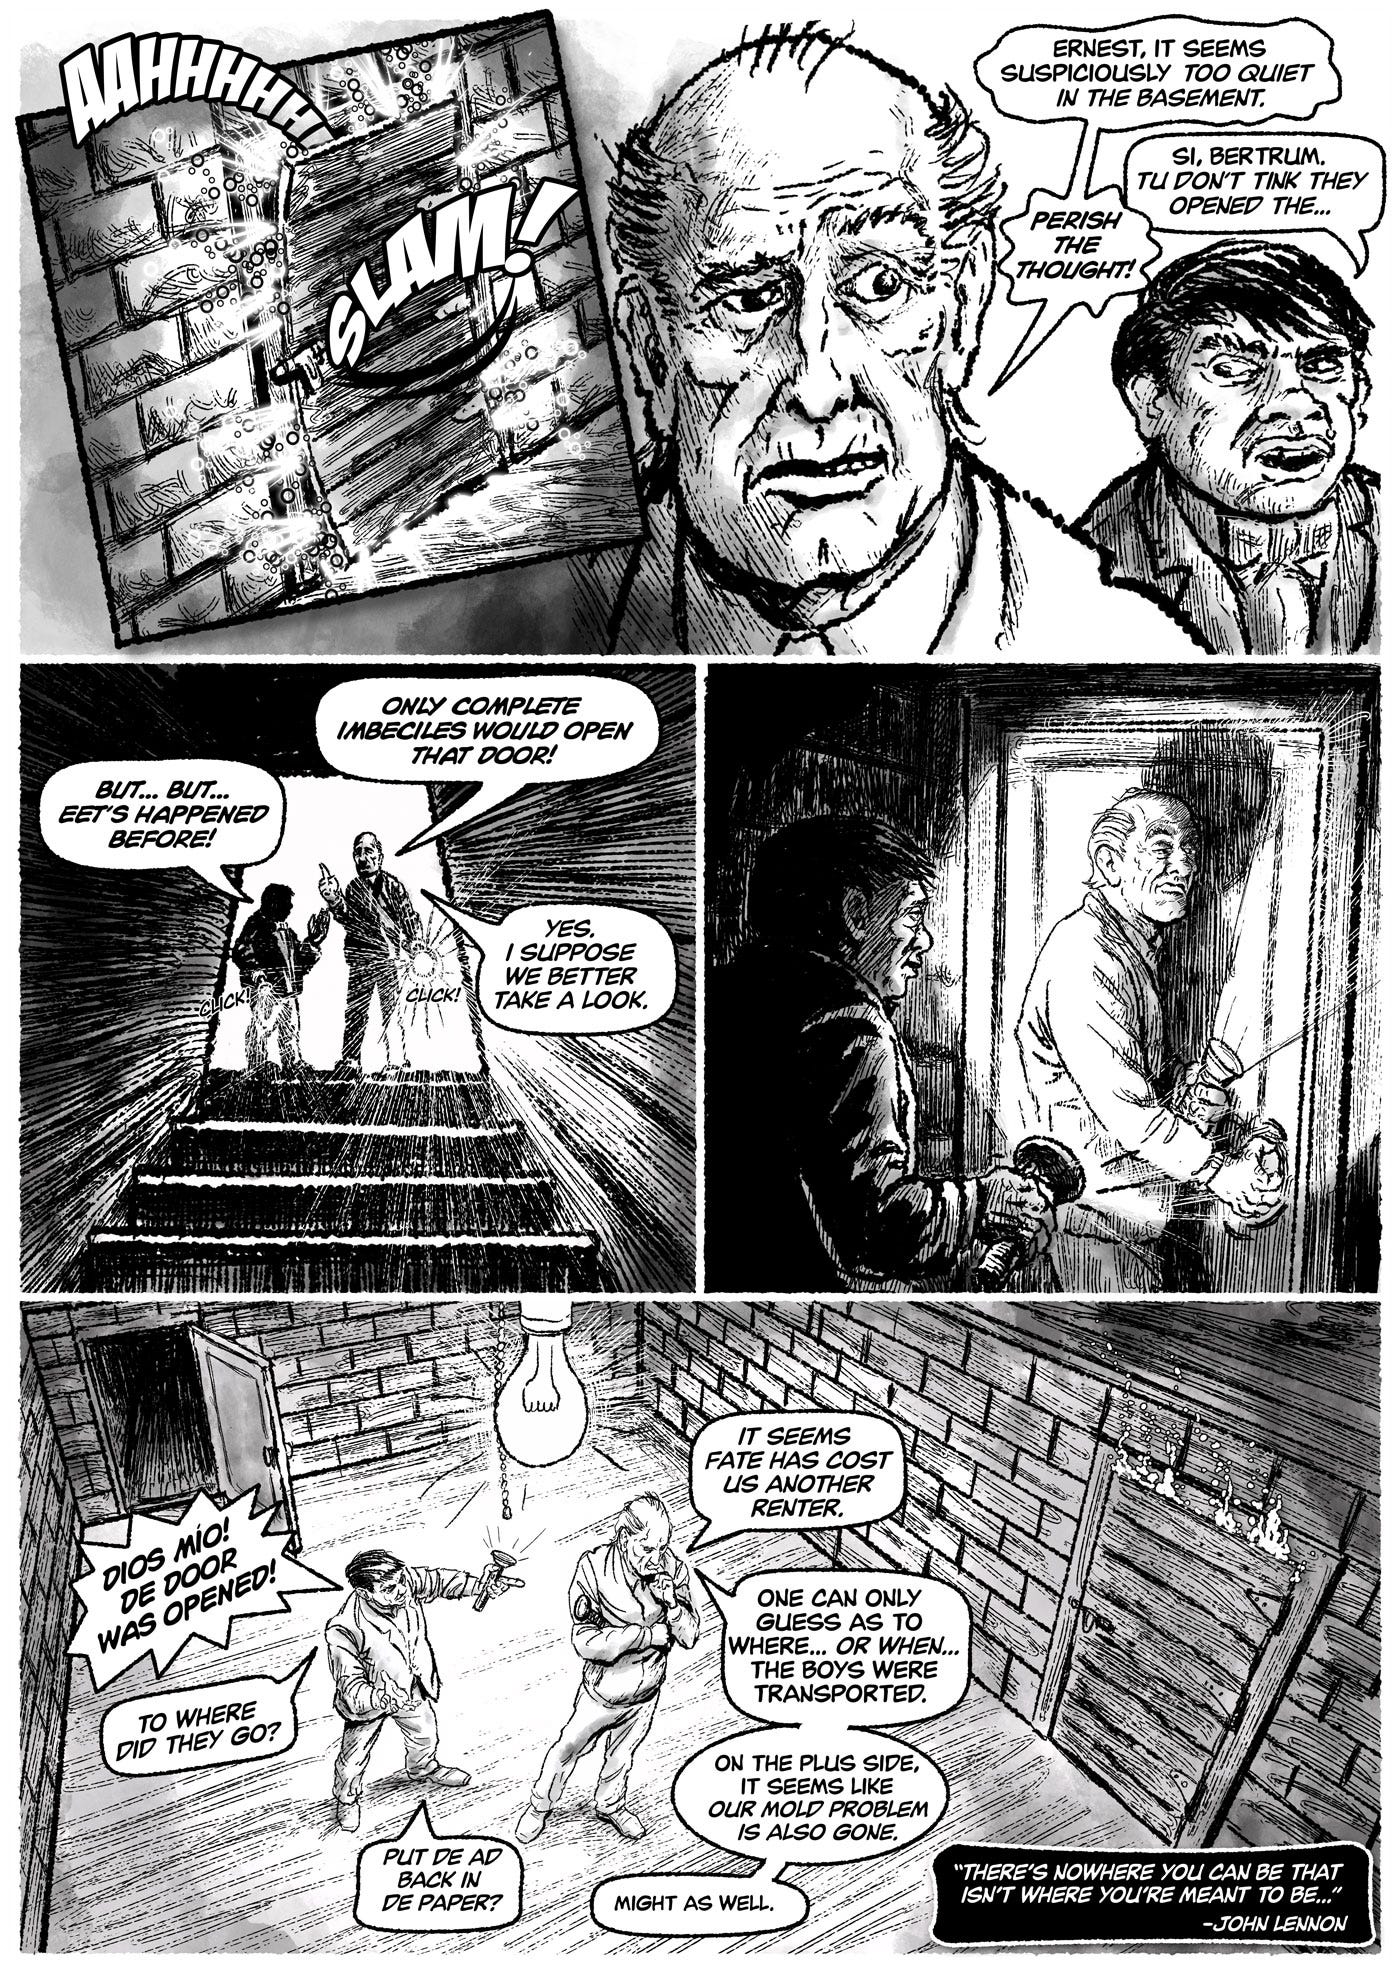 Practice Schmacktice - Page 12 - Hammer Stories by E.R. Flynn